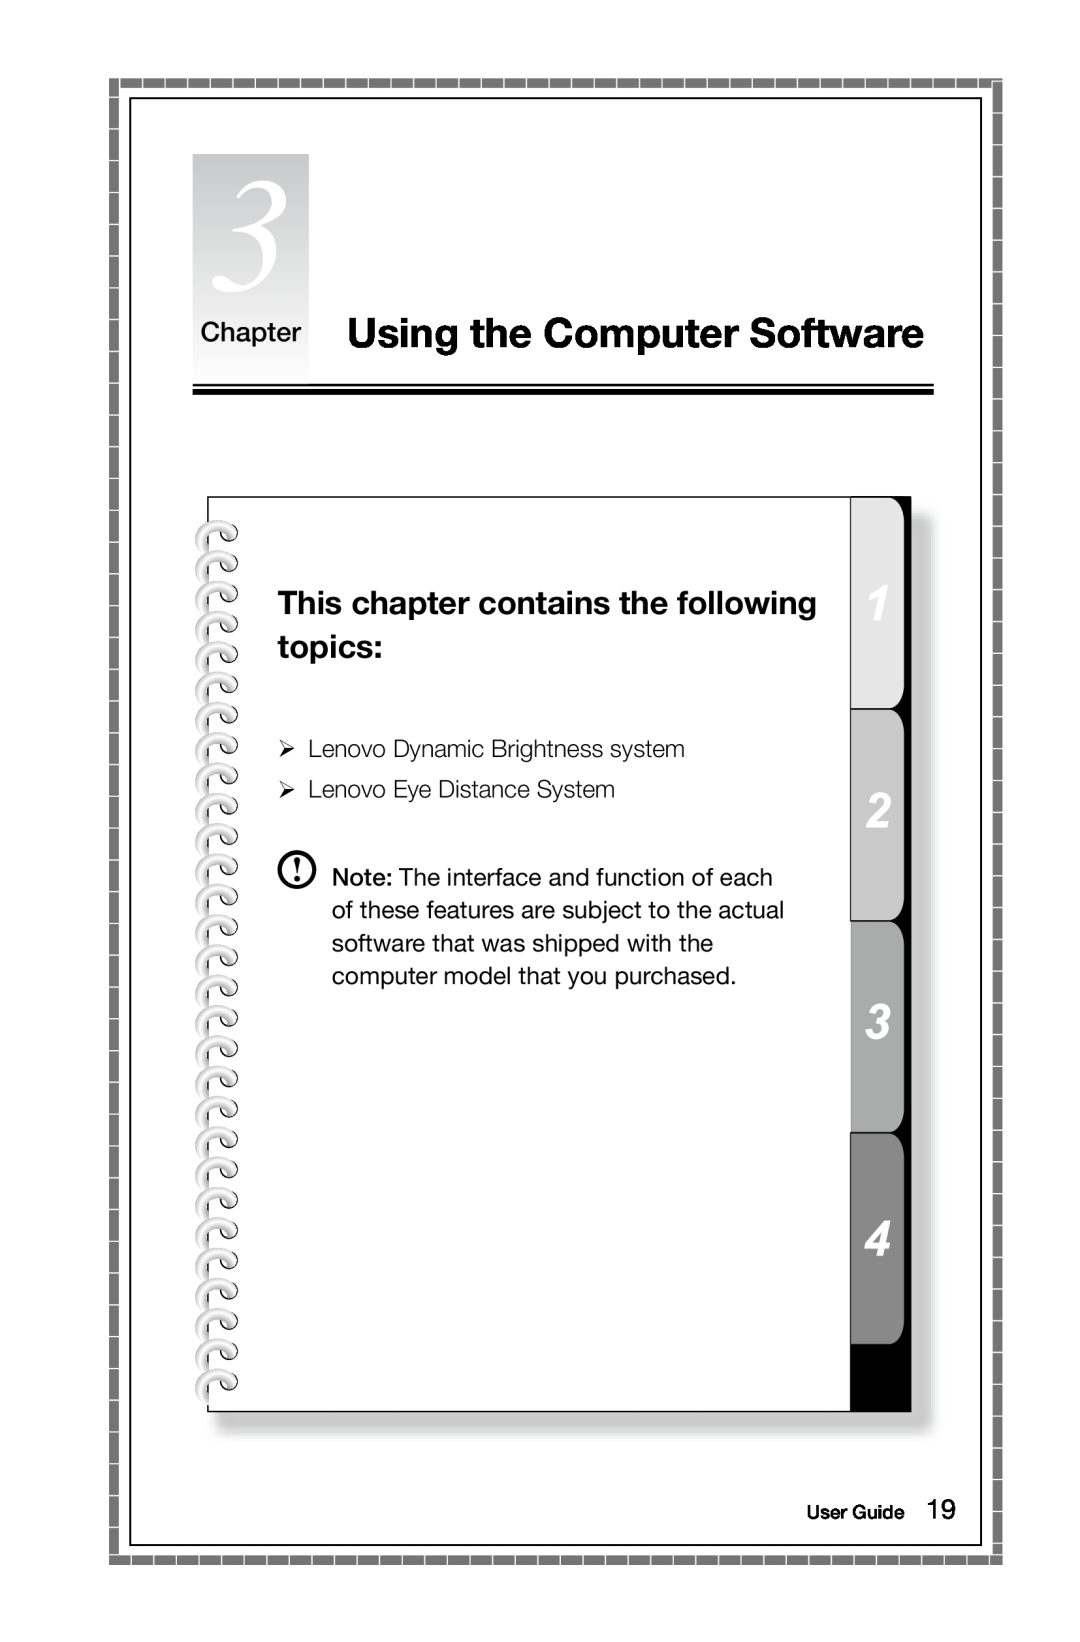 Lenovo 10068/7752, 10059/7723 Chapter Using the Computer Software, This chapter contains the following topics, User Guide 